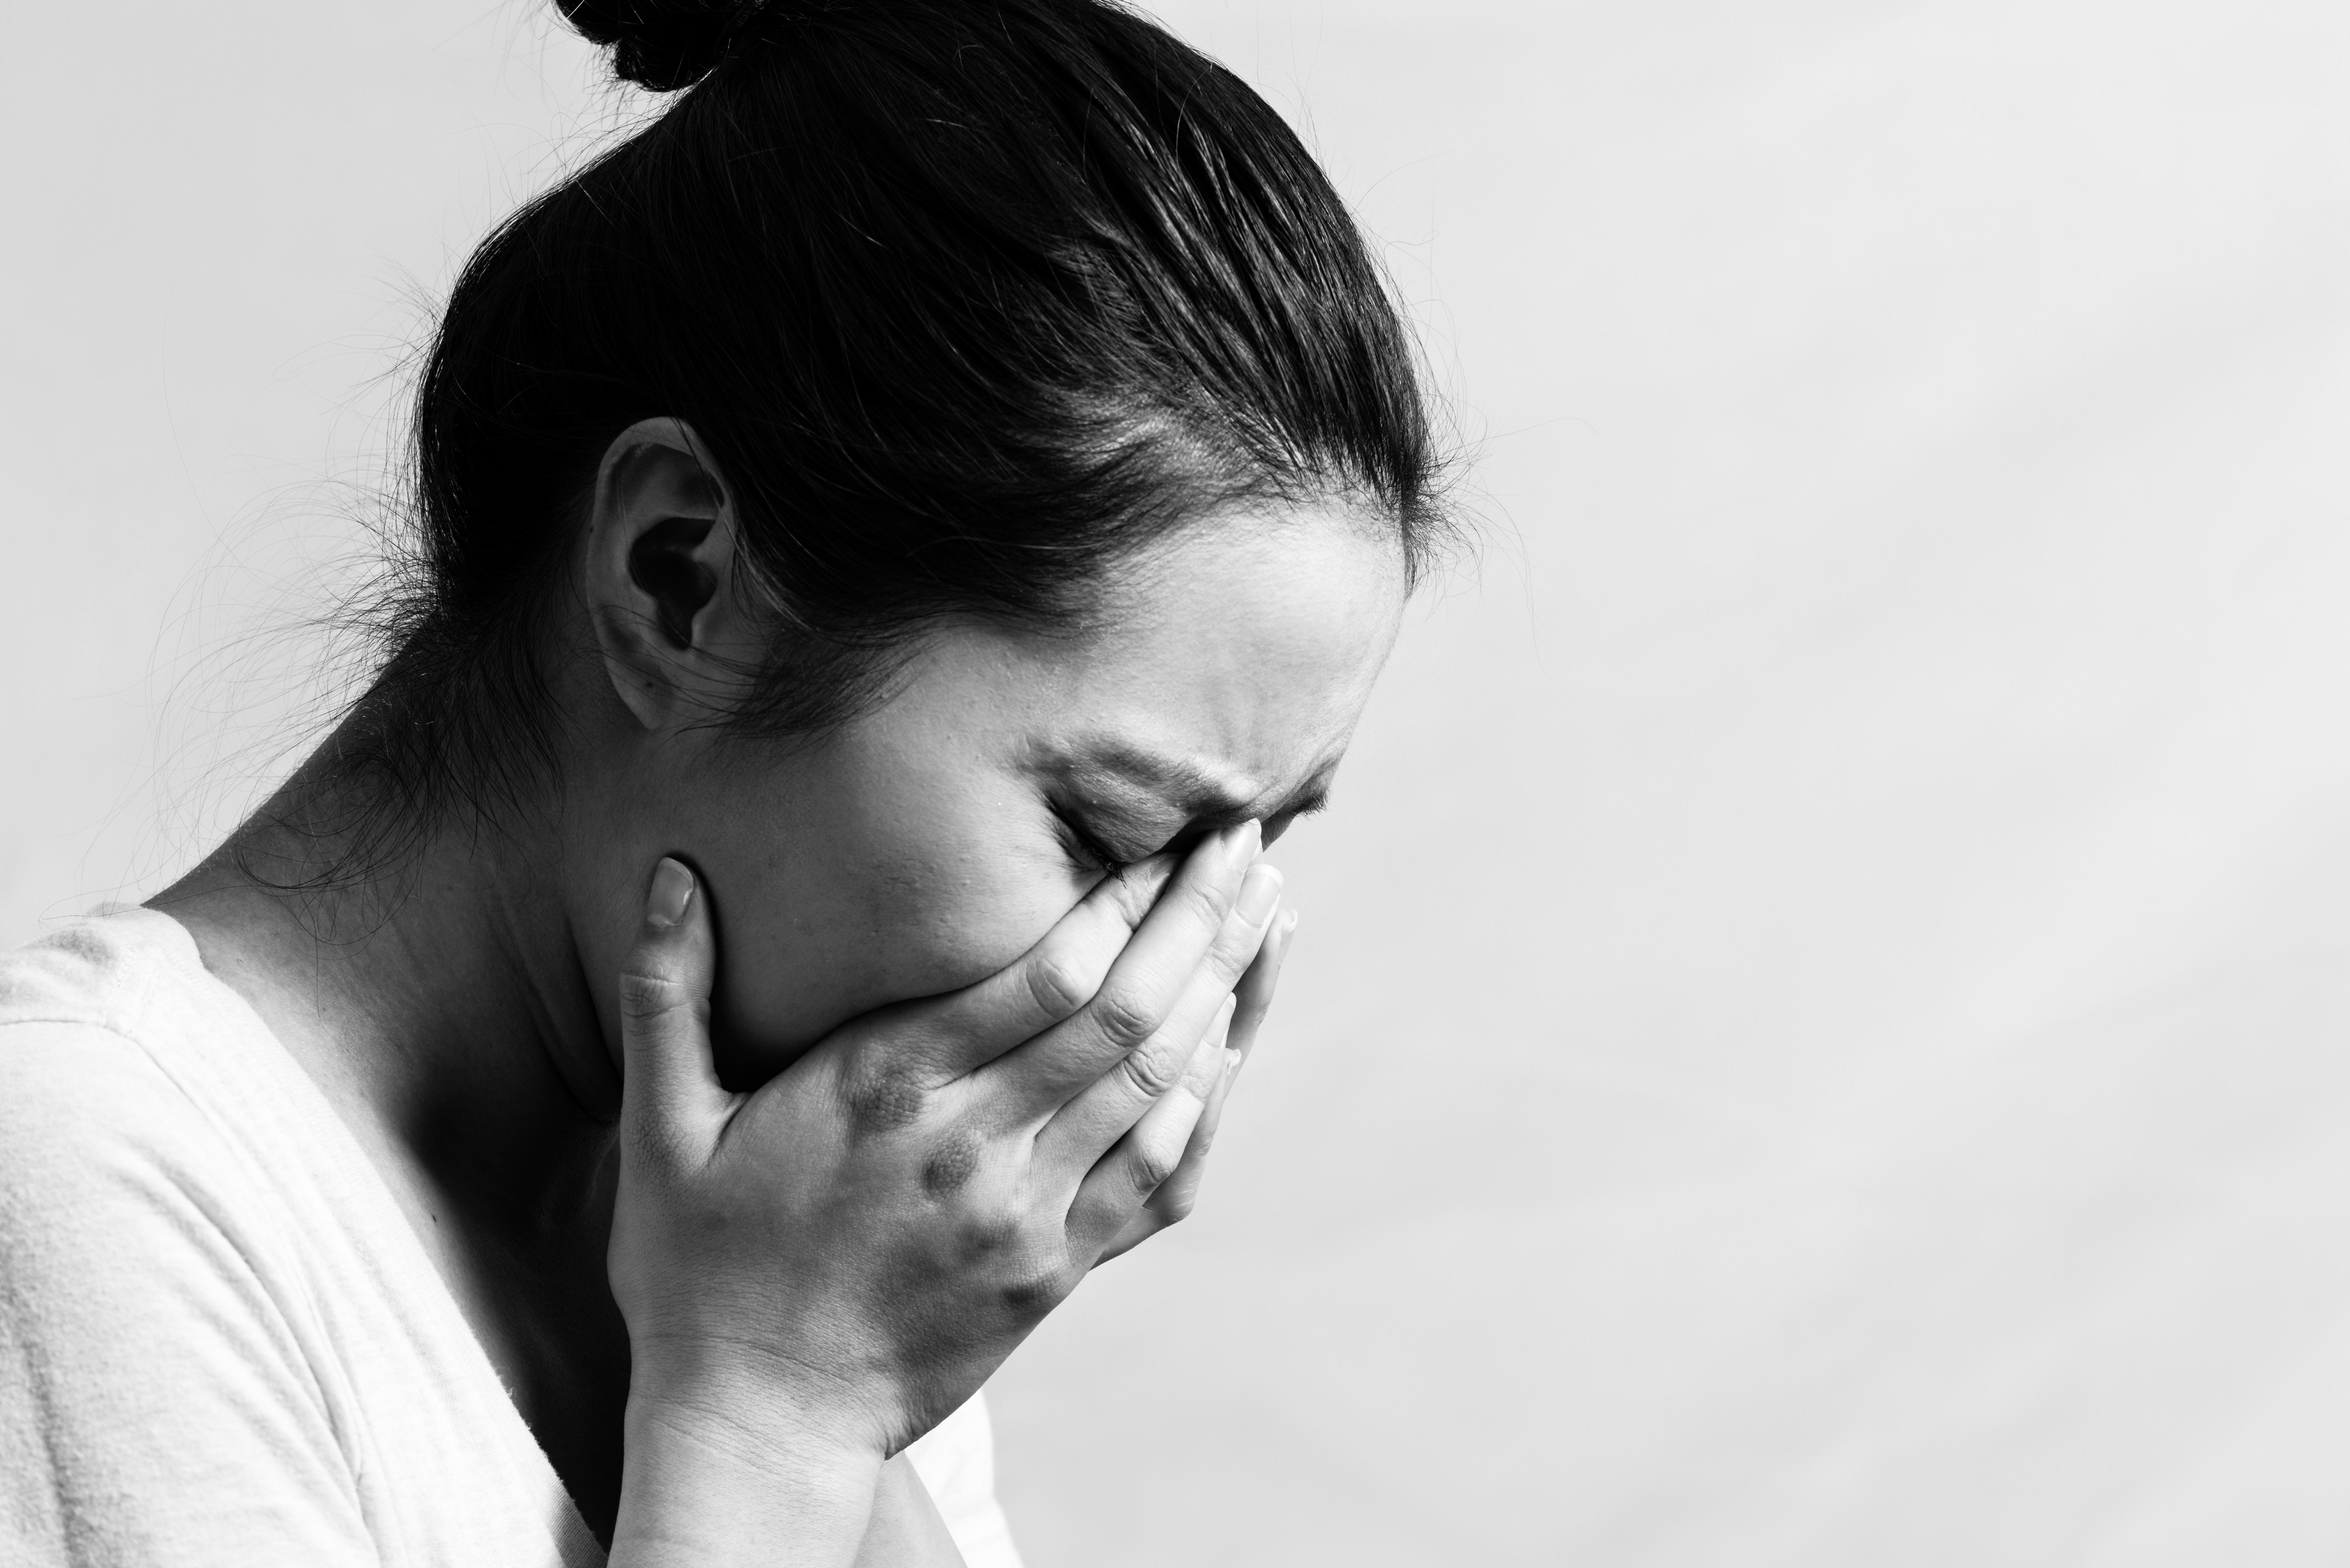 A grayscale photo of a woman crying | Source: Shutterstock